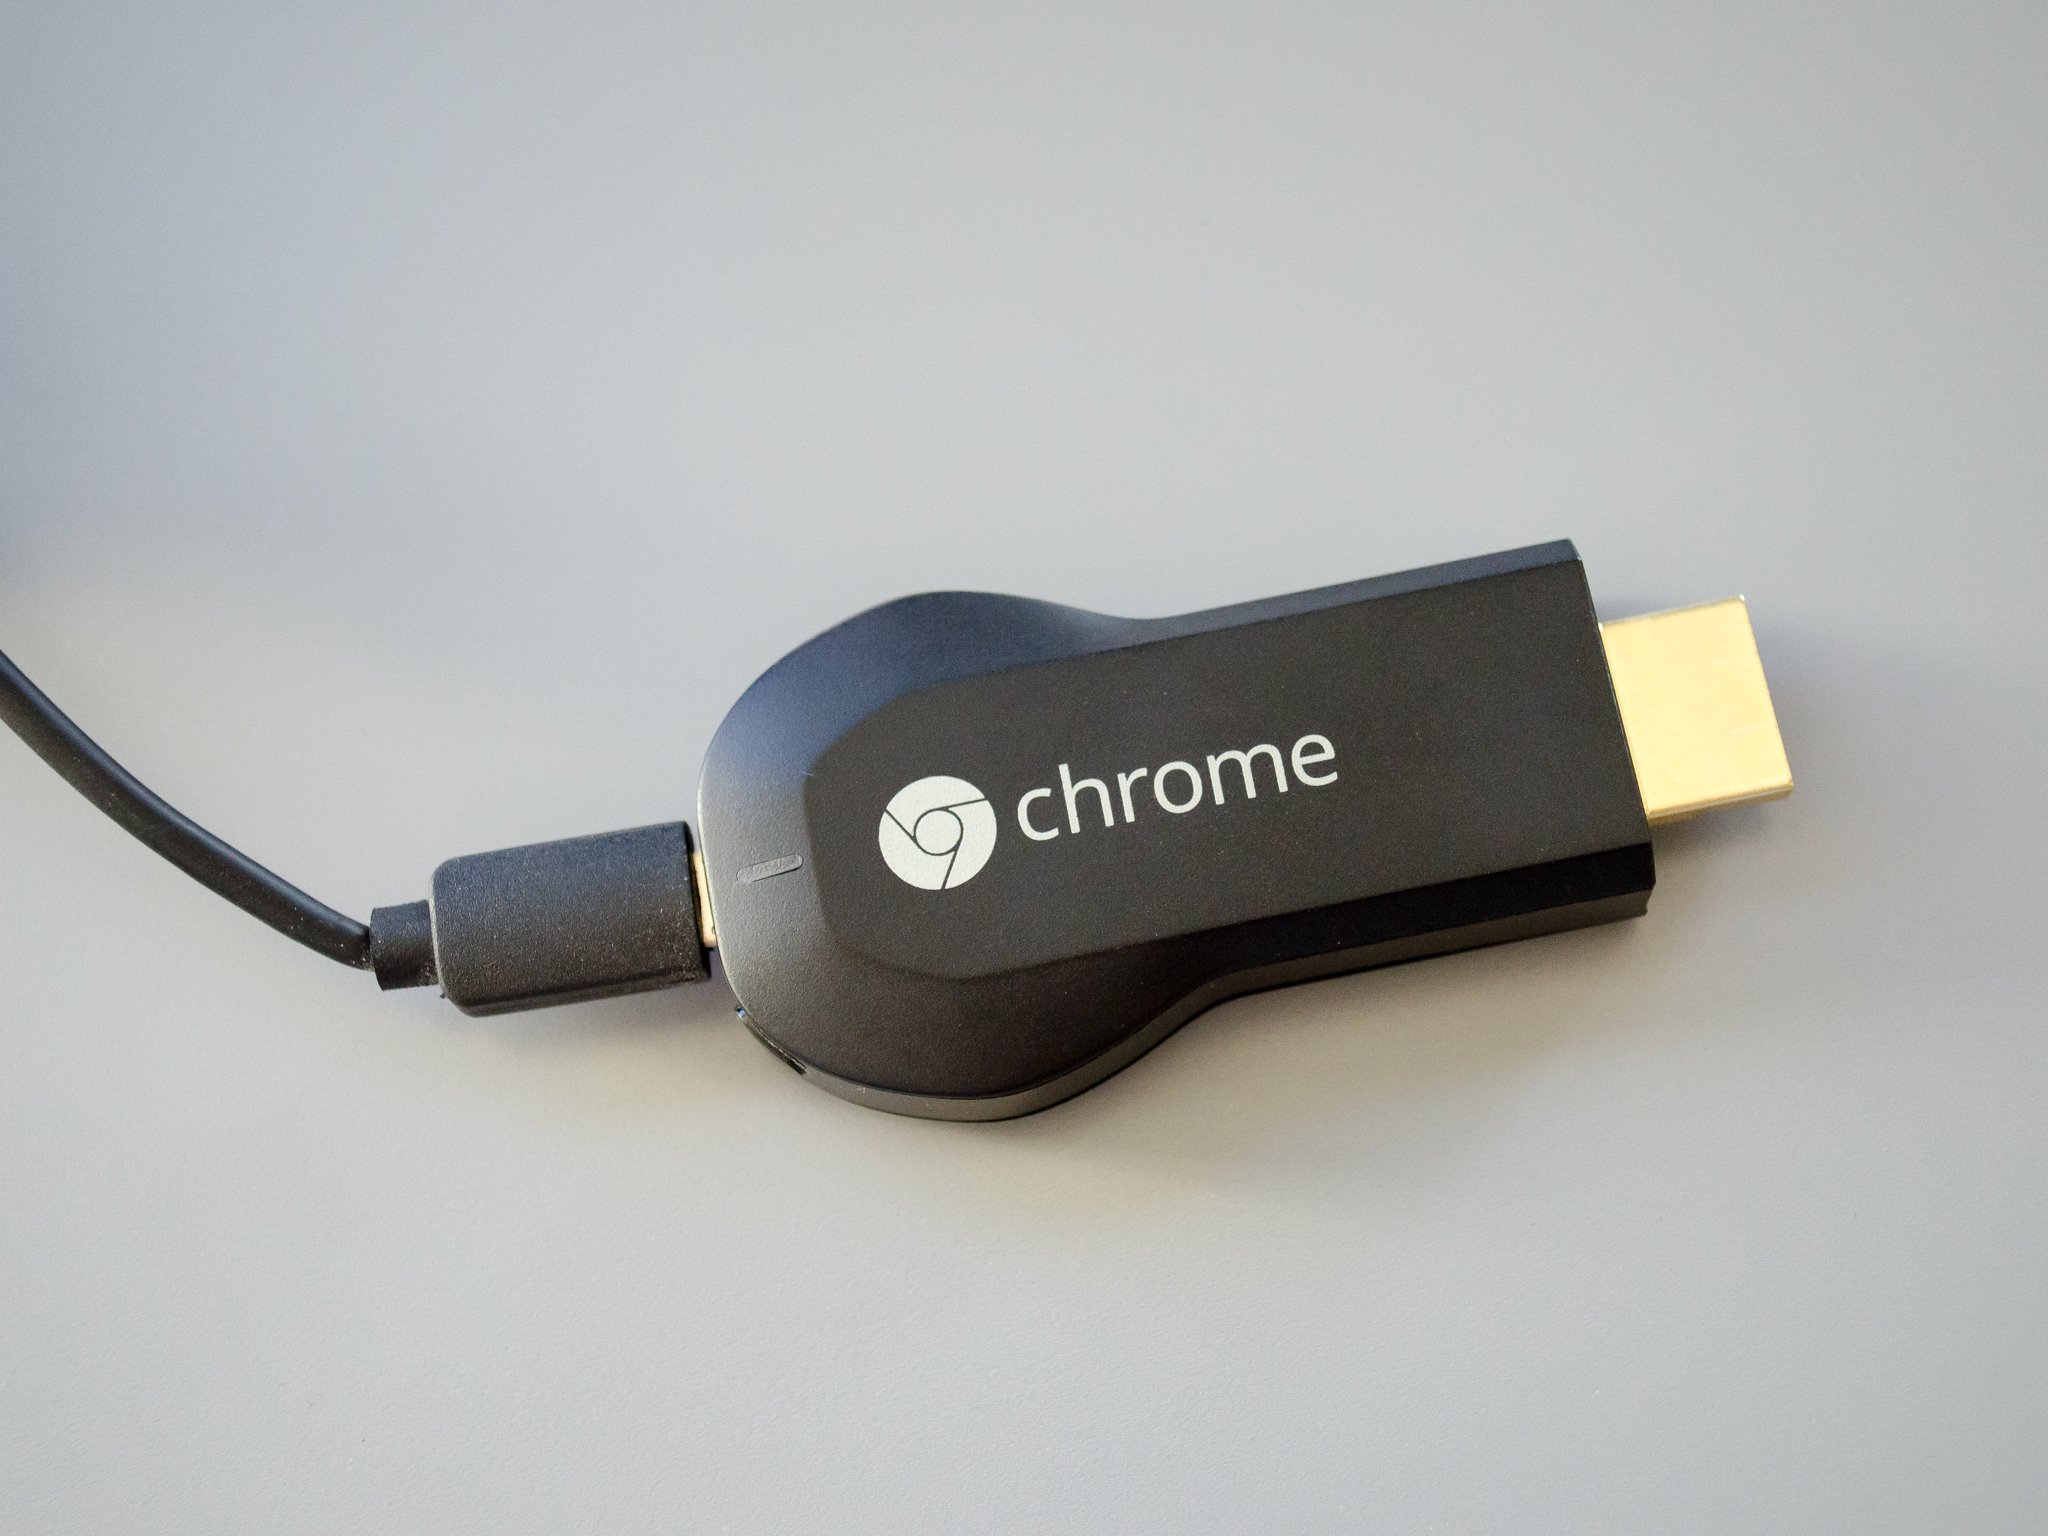 Save 5 when you buy two Chromecasts from the Google Store